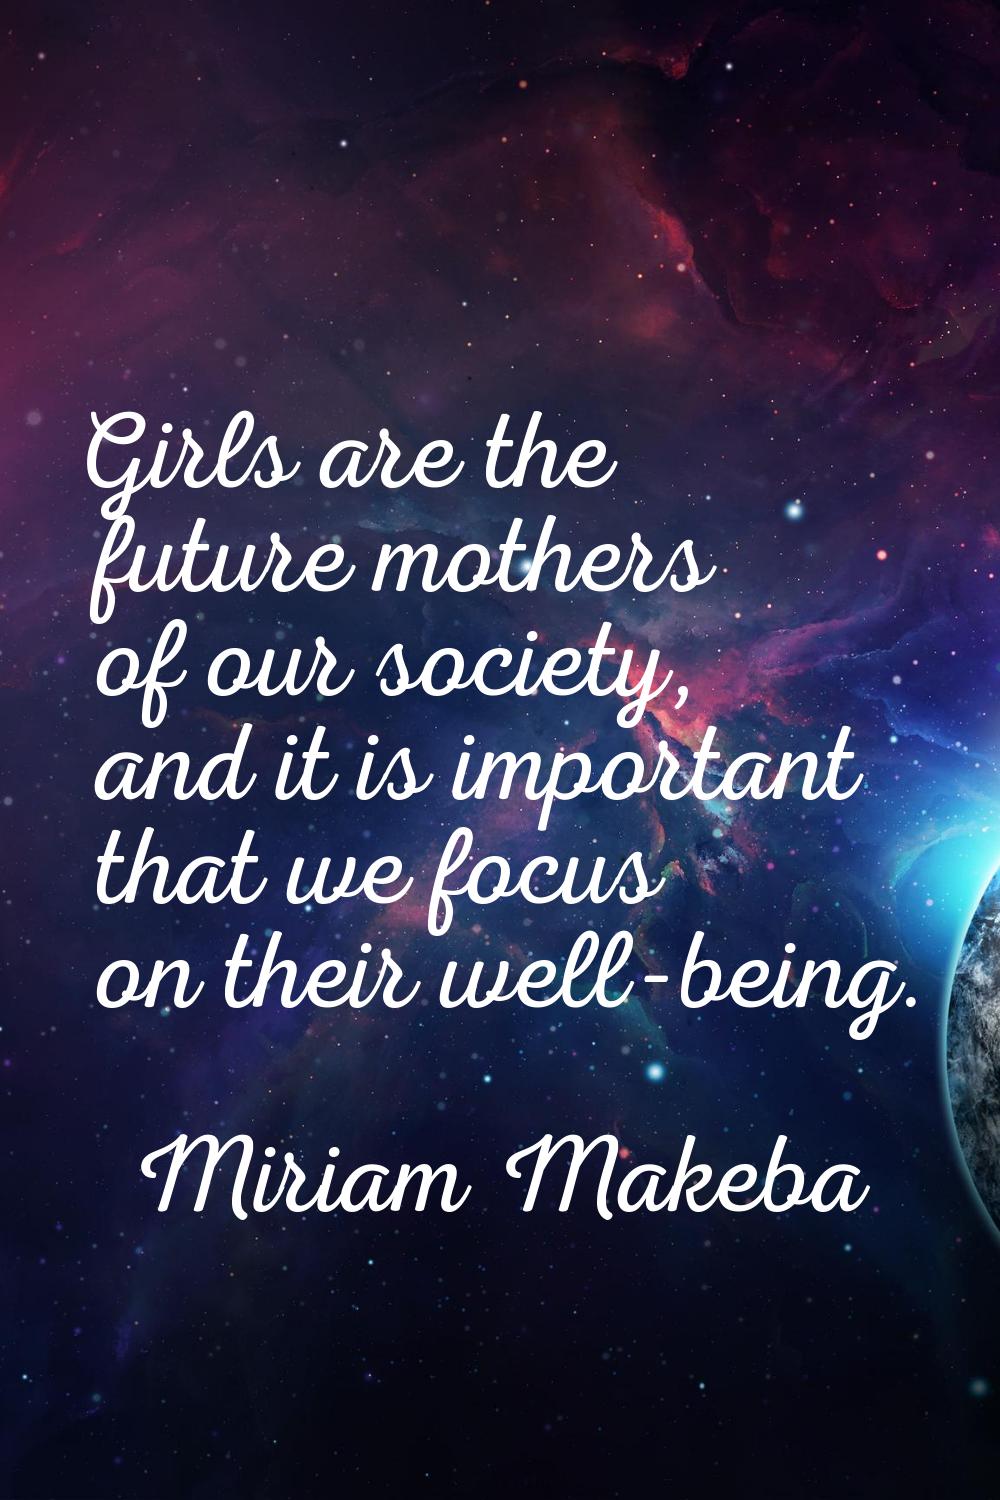 Girls are the future mothers of our society, and it is important that we focus on their well-being.